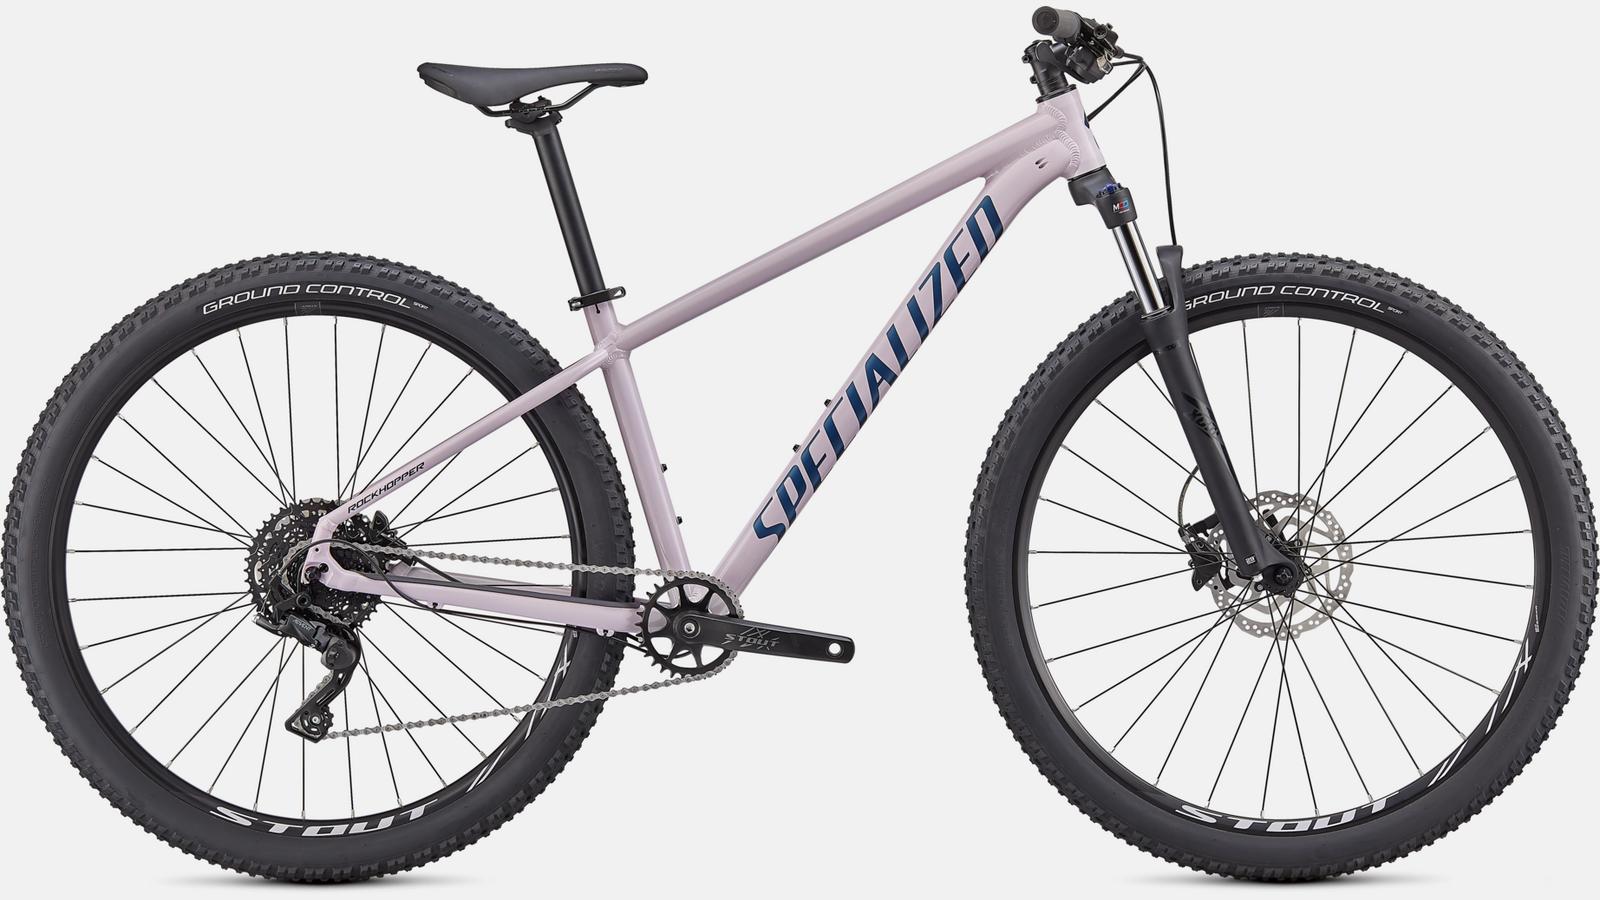 Paint for 2021 Specialized Rockhopper Comp 27.5 - Gloss Clay